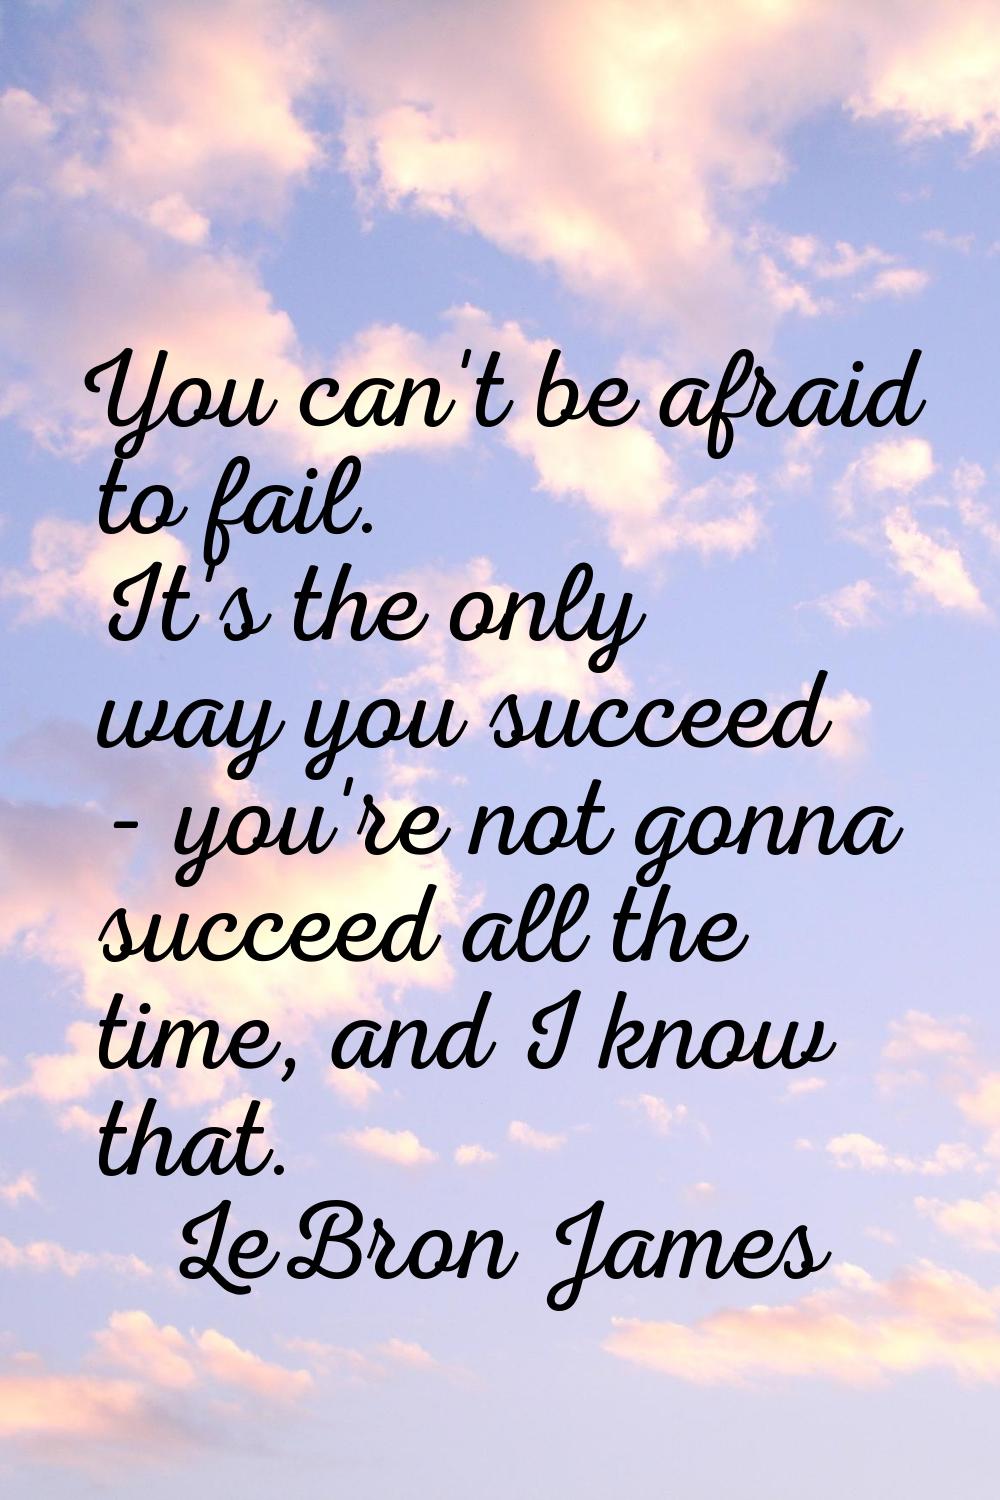 You can't be afraid to fail. It's the only way you succeed - you're not gonna succeed all the time,